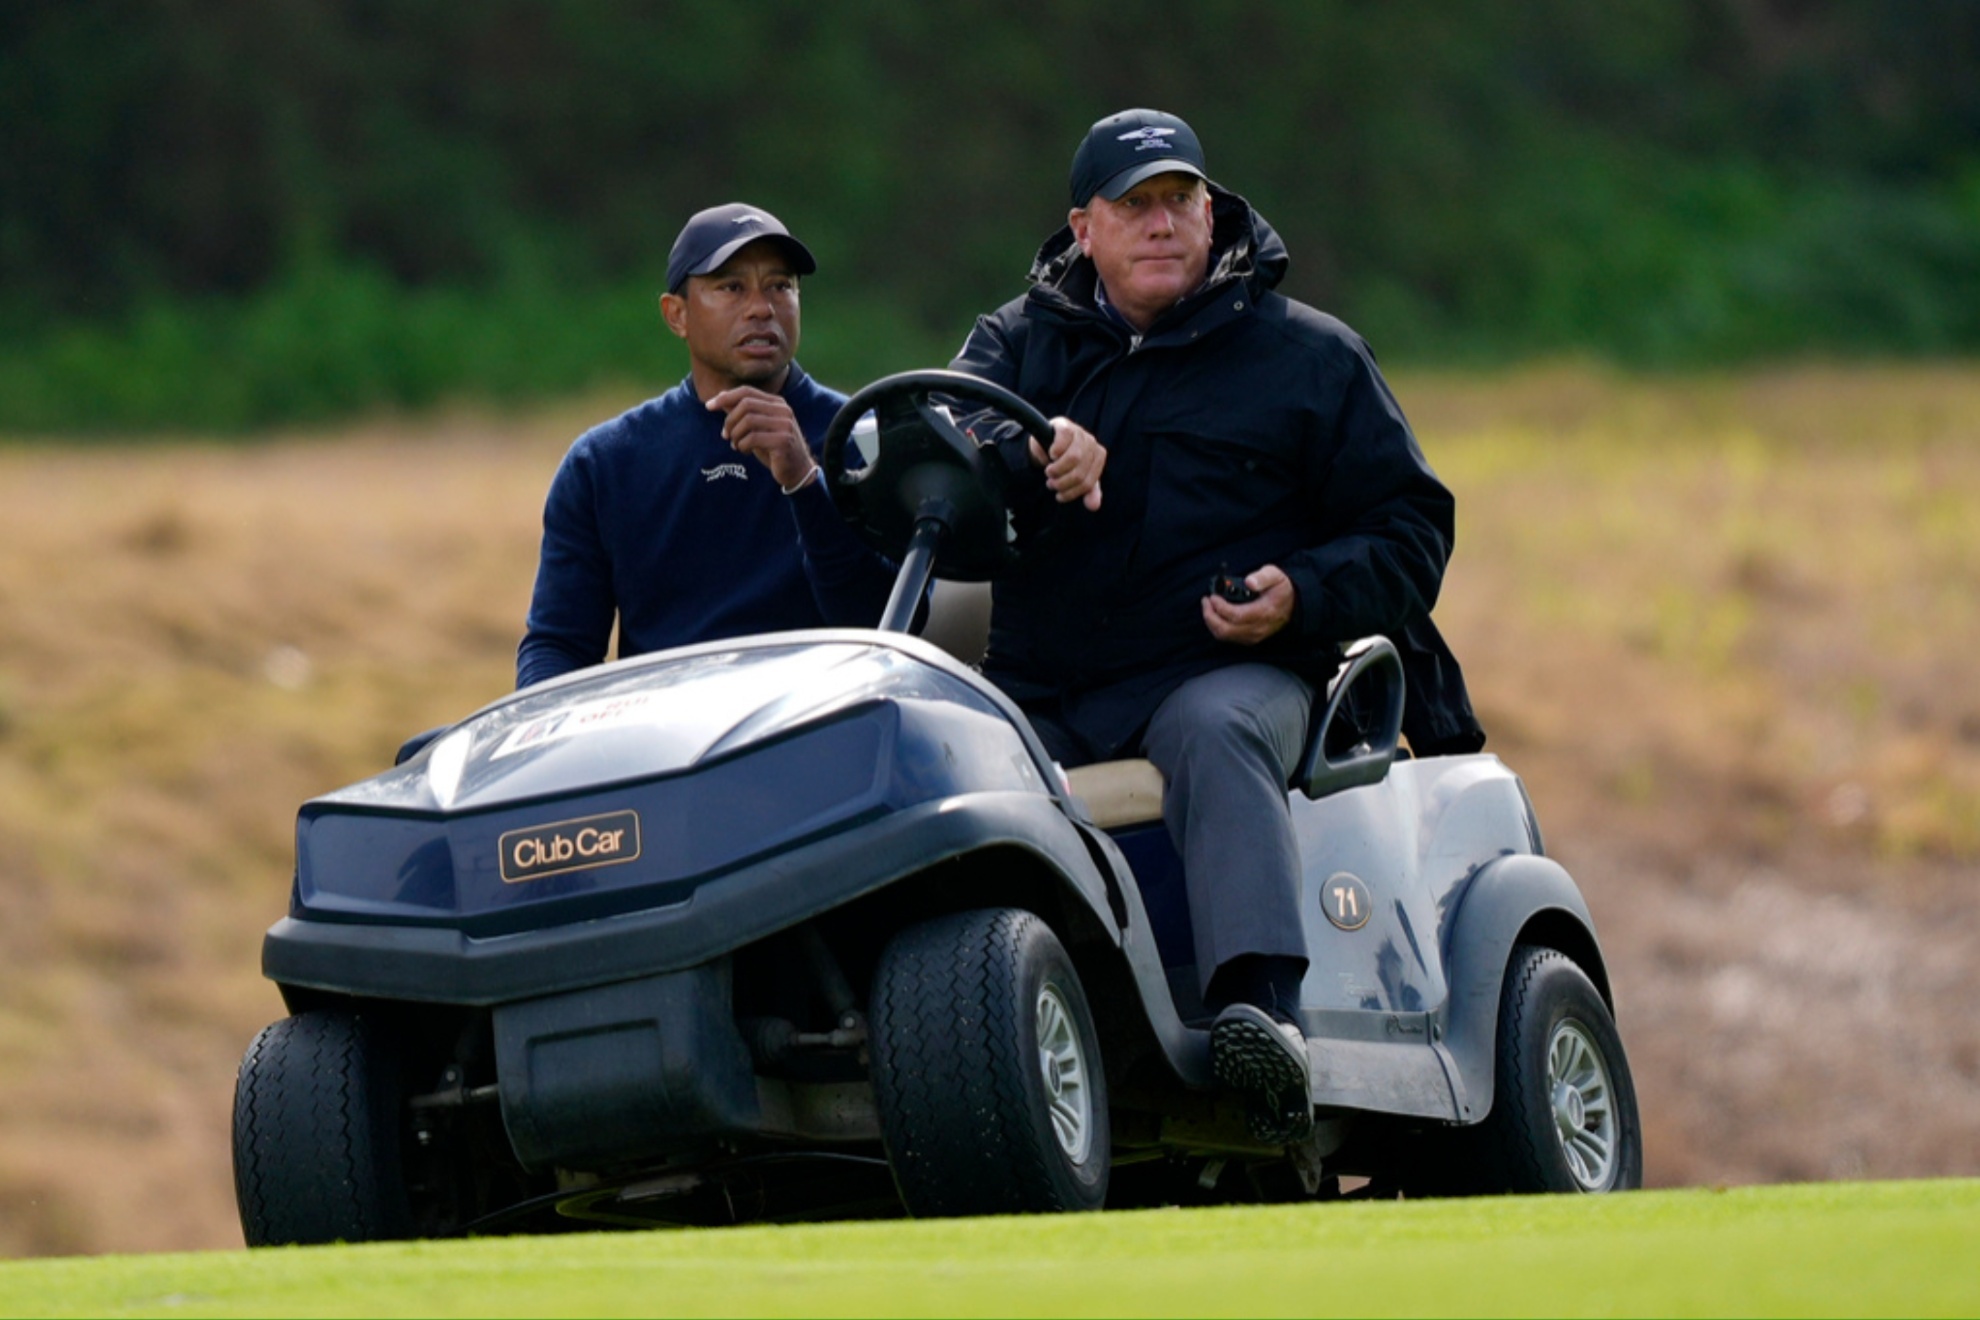 tiger woods will play the pga champions tour in a cart due to injuries